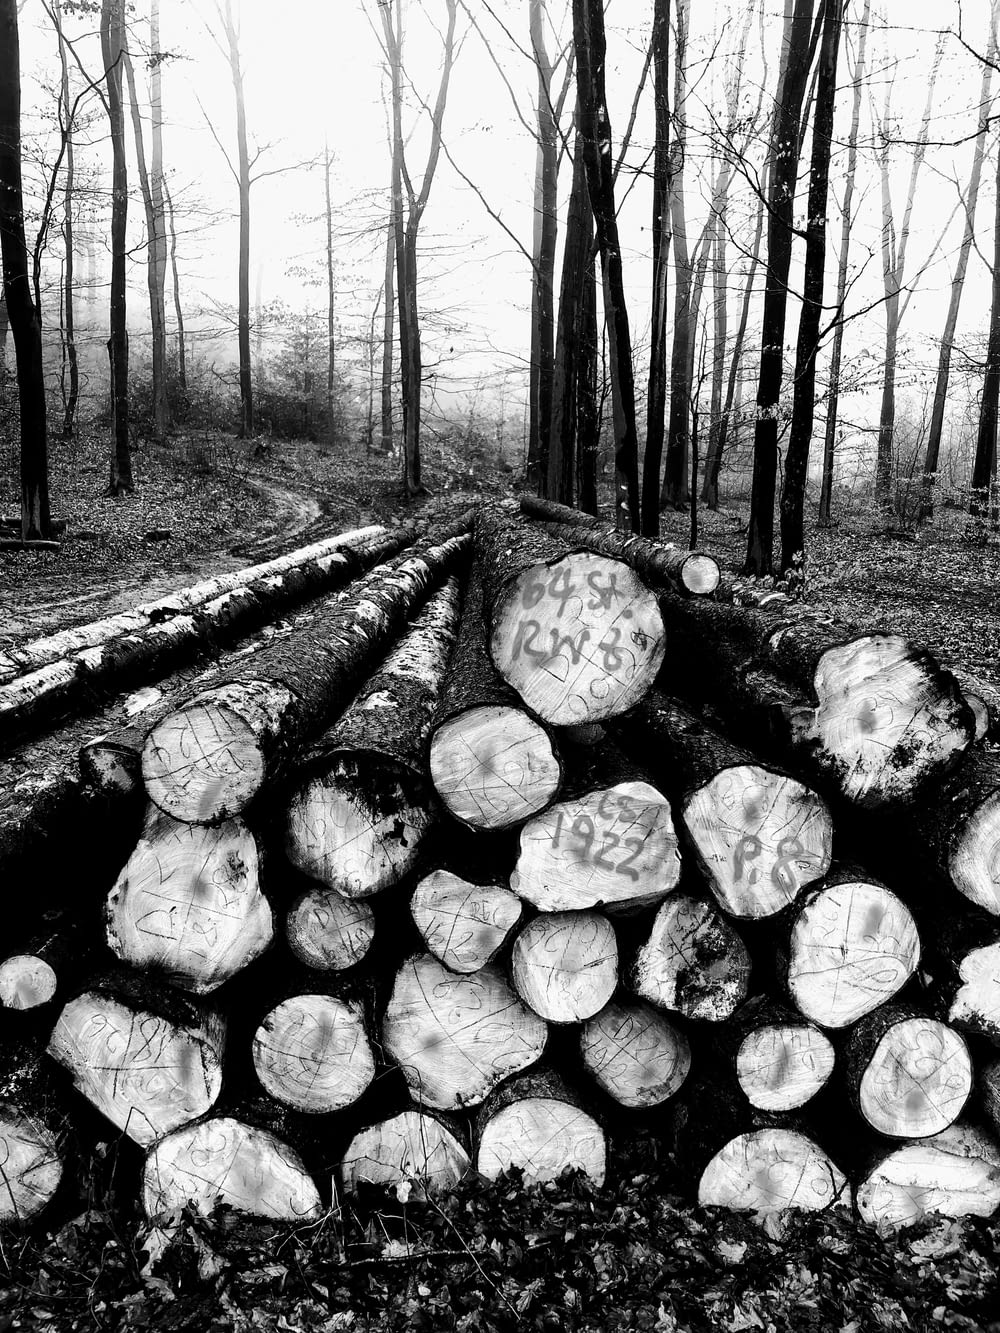 grayscale photo of wood logs on wooden pathway